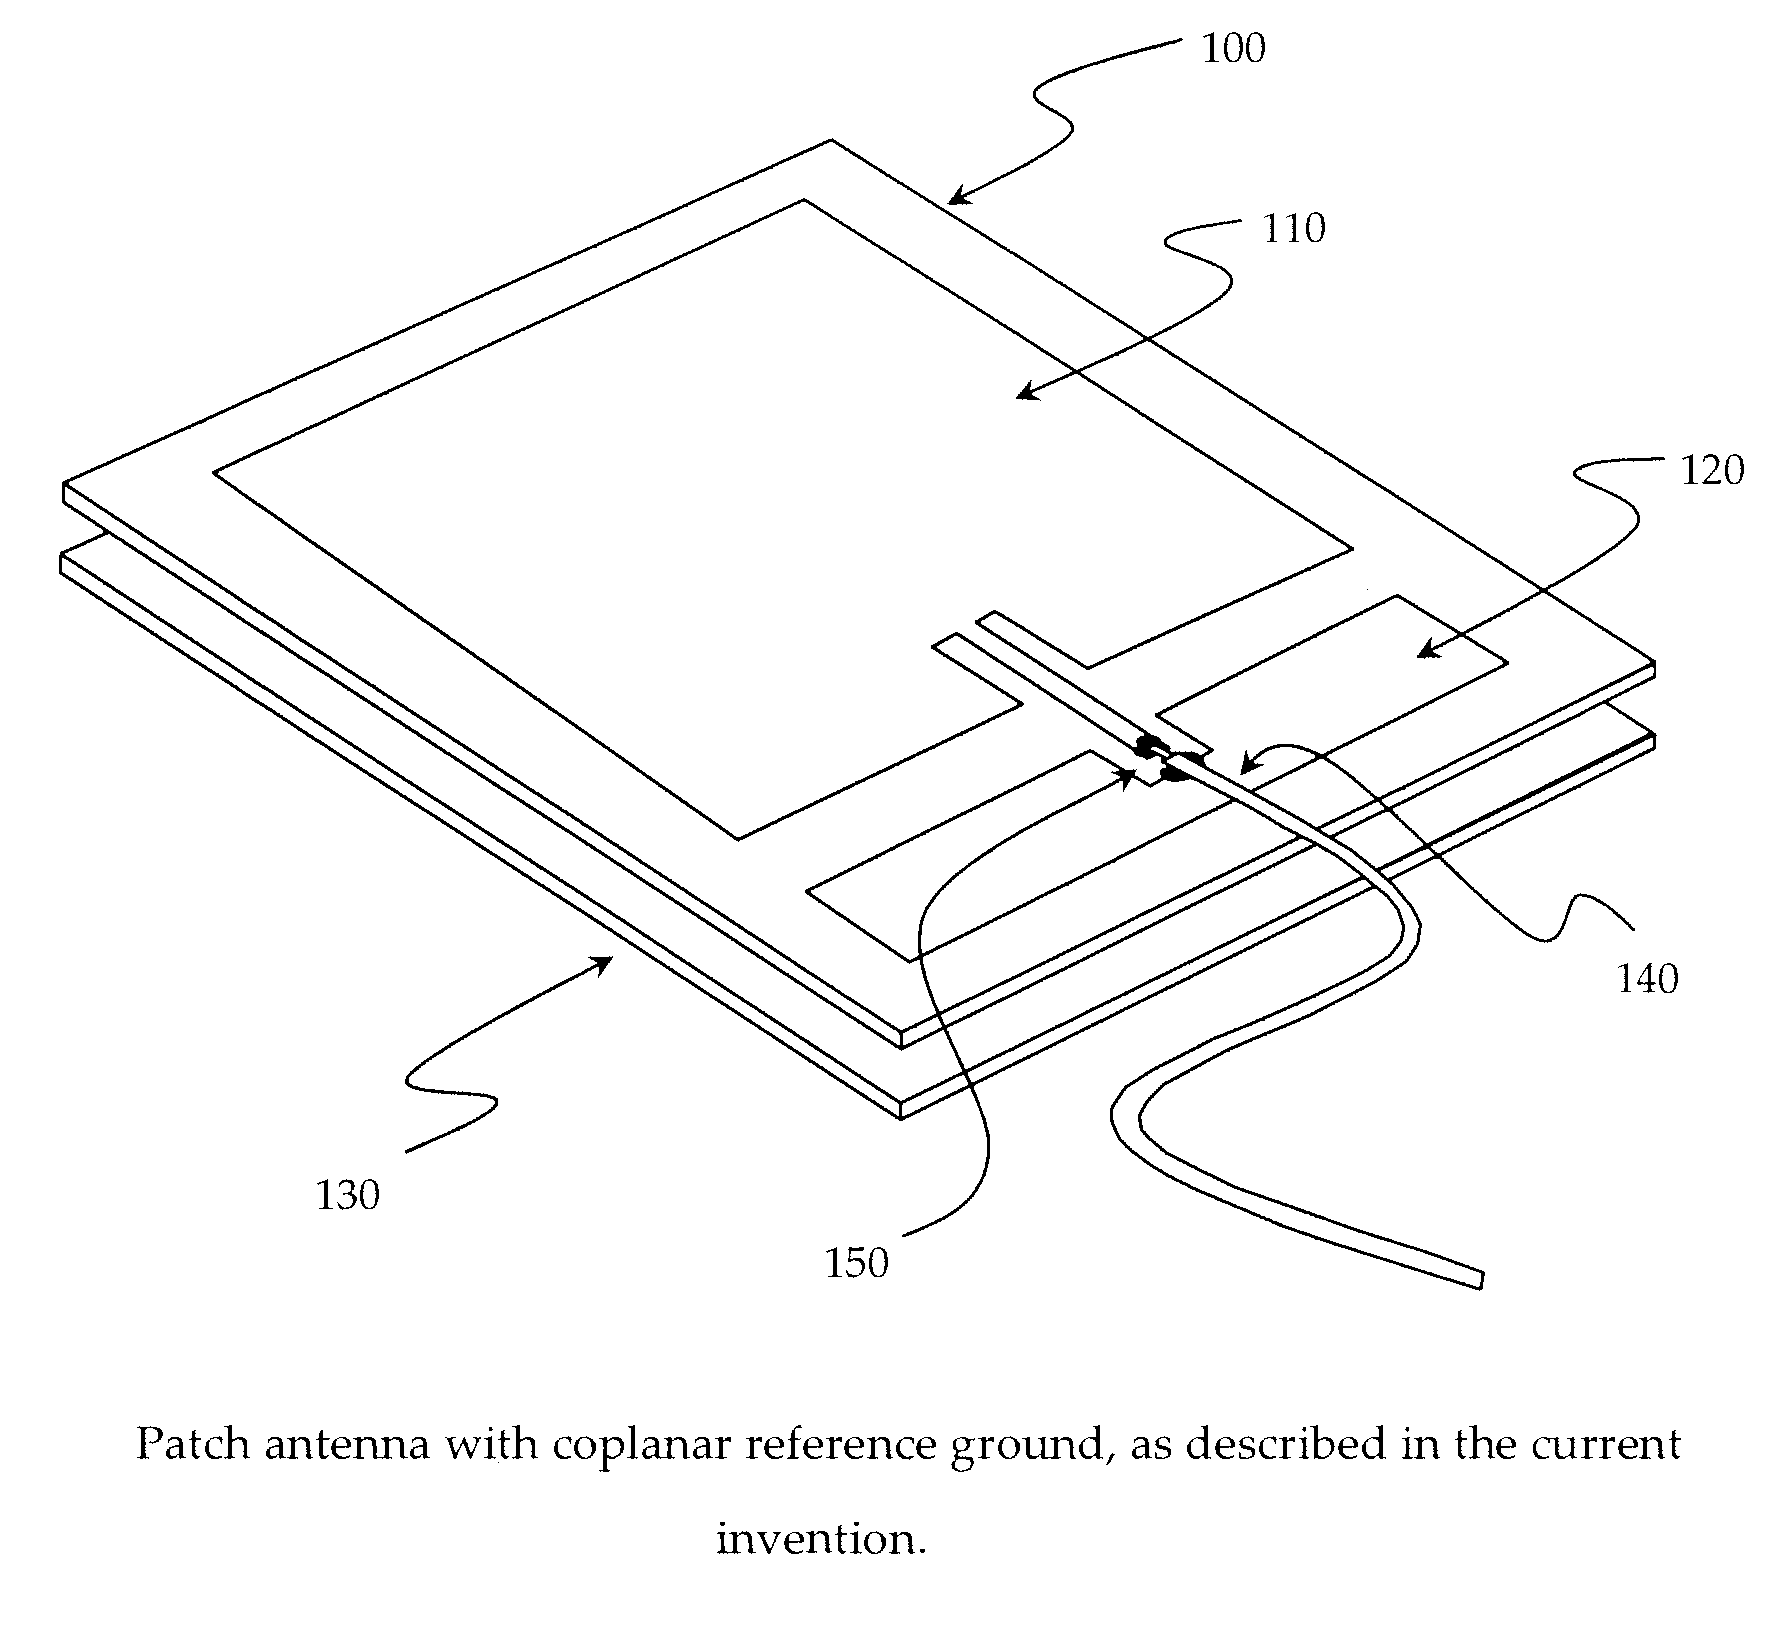 RFID patch antenna with coplanar reference ground and floating grounds